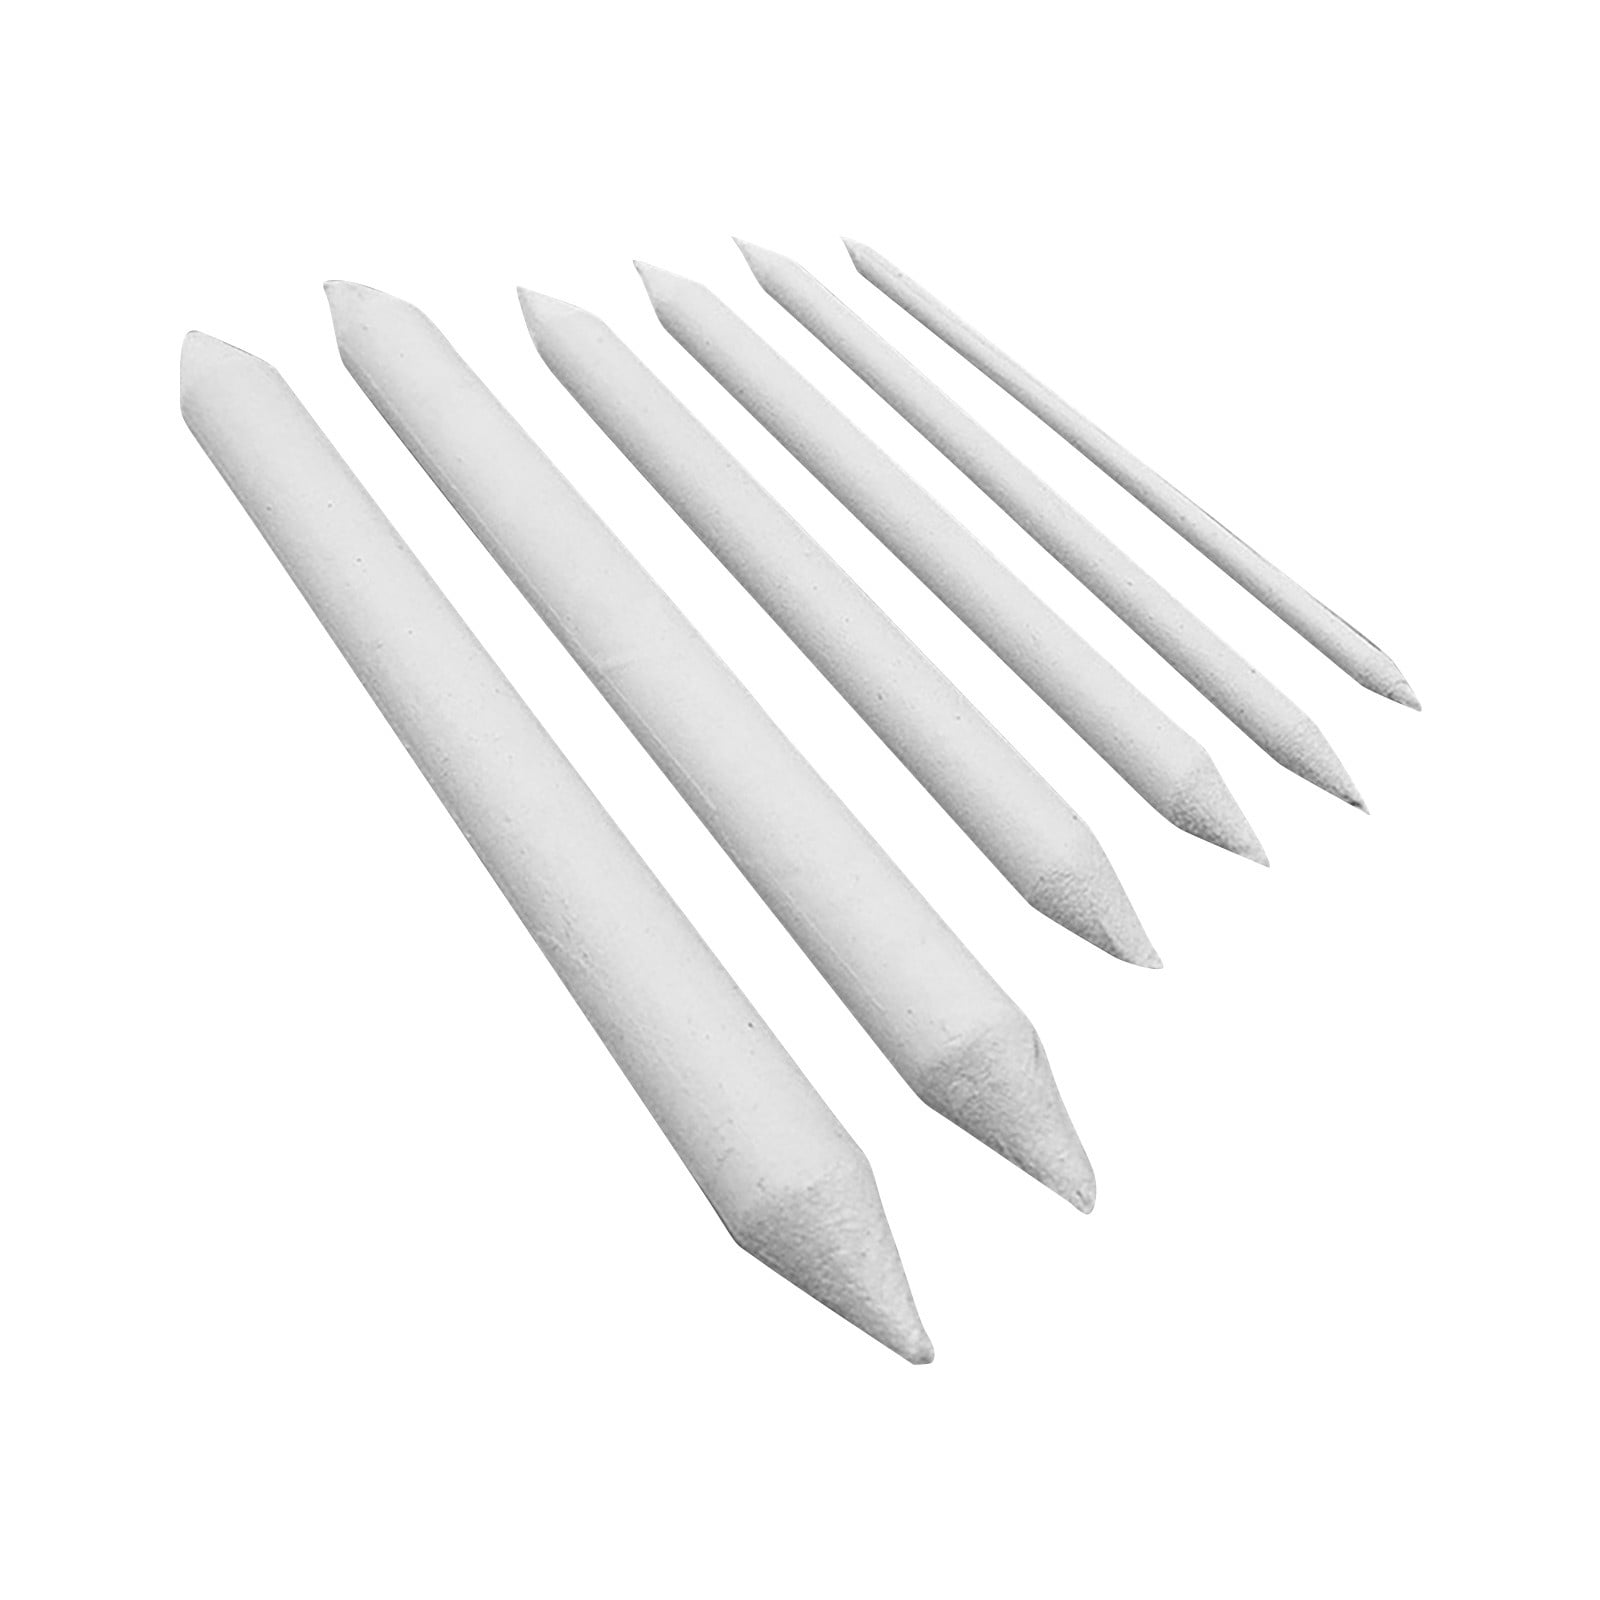 Blending Stumps Solid Double-Ended Points Blend Smudge Easily Sharpened  Sanded Shading Pencils for Drawing Sketching 6PC 